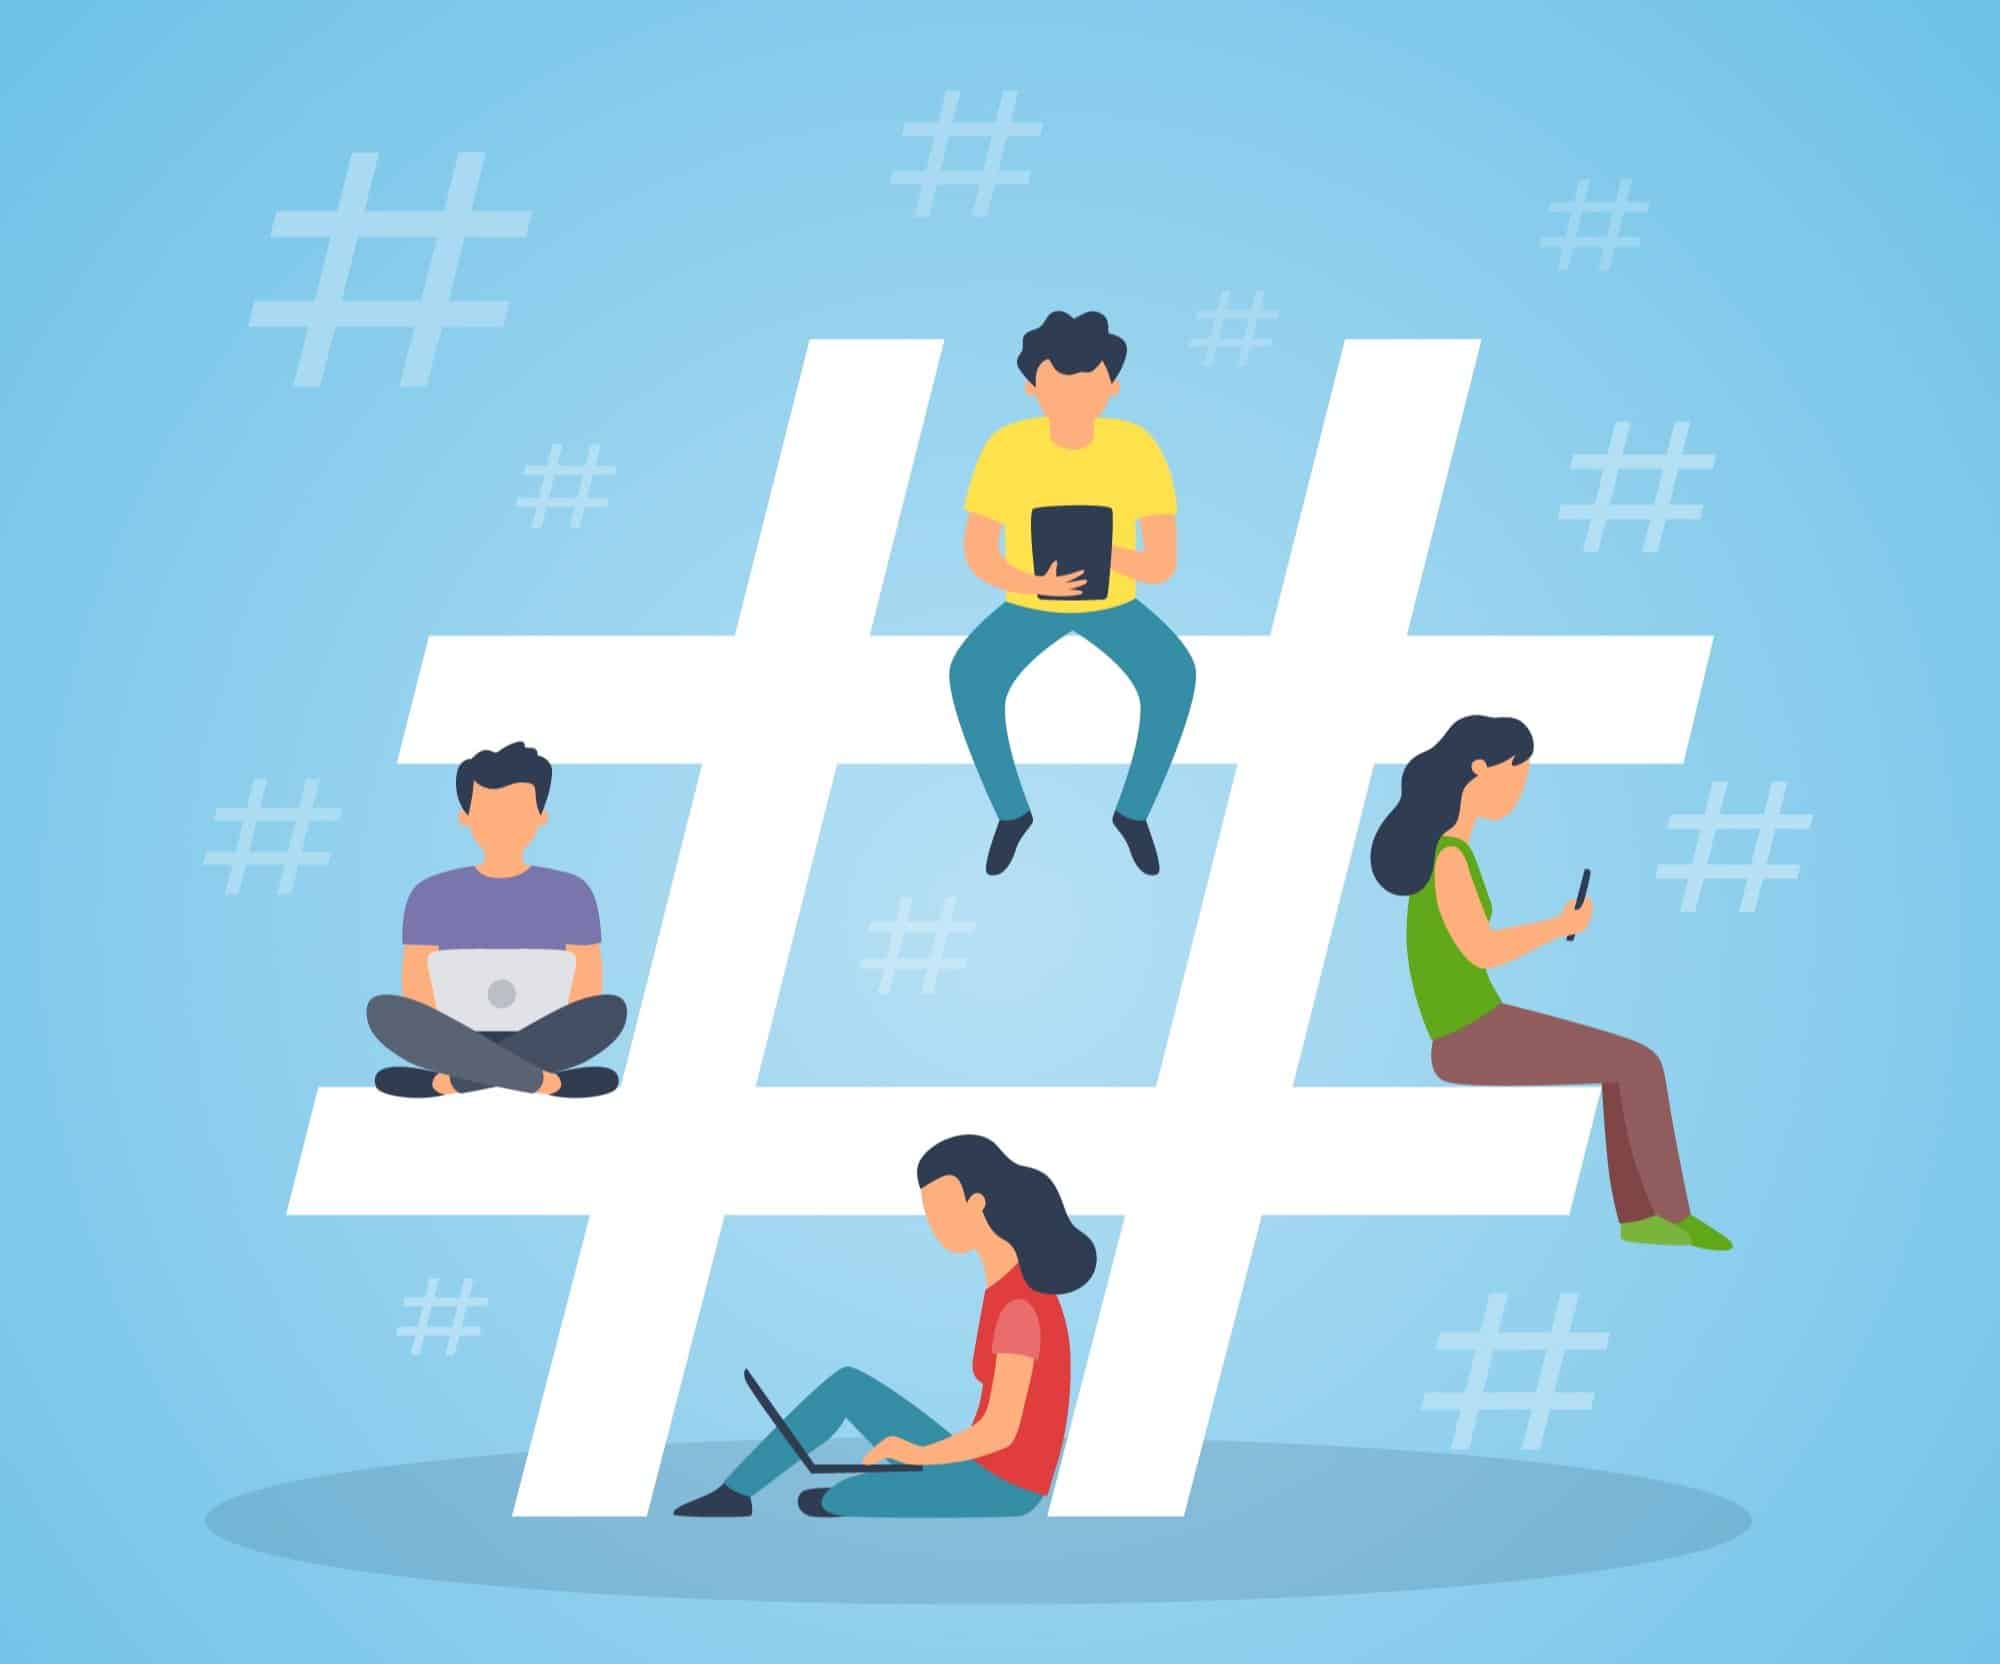 Abstract digital image of people sitting on a giant hashtag